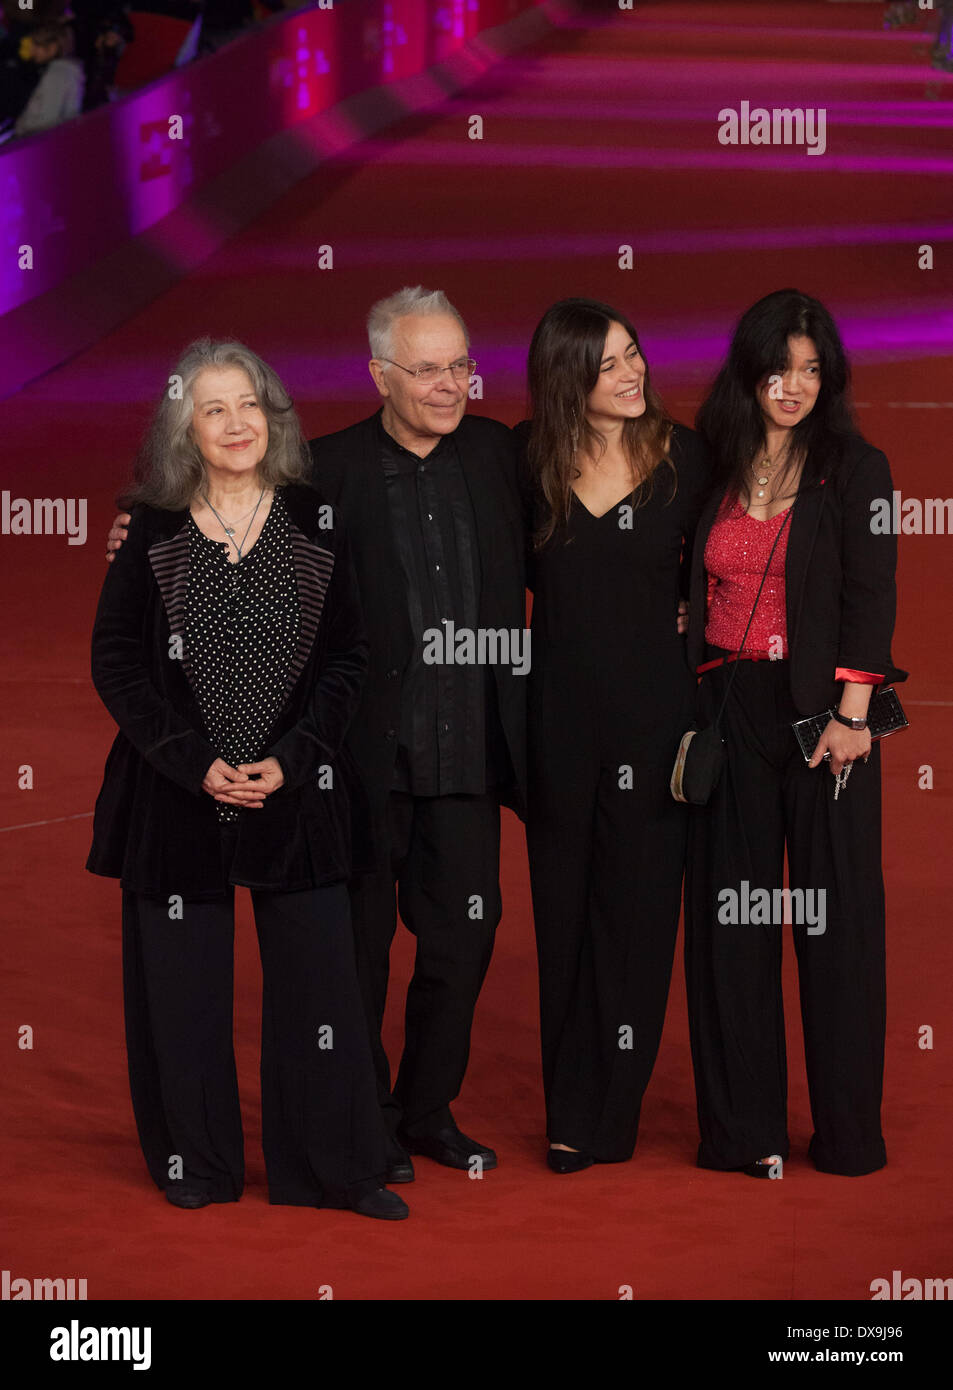 Martha Argerich, Stephen Kovacevich, Stephanie Argerich and Lyda Chen 7th Rome International Film Festival - 'Bloody Daughter' - Premiere Featuring: Martha Argerich,Stephen Kovacevich,Stephanie Argerich and Lyda Chen Where: Rome, Italy When: 16 Nov 2012 ** Stock Photo